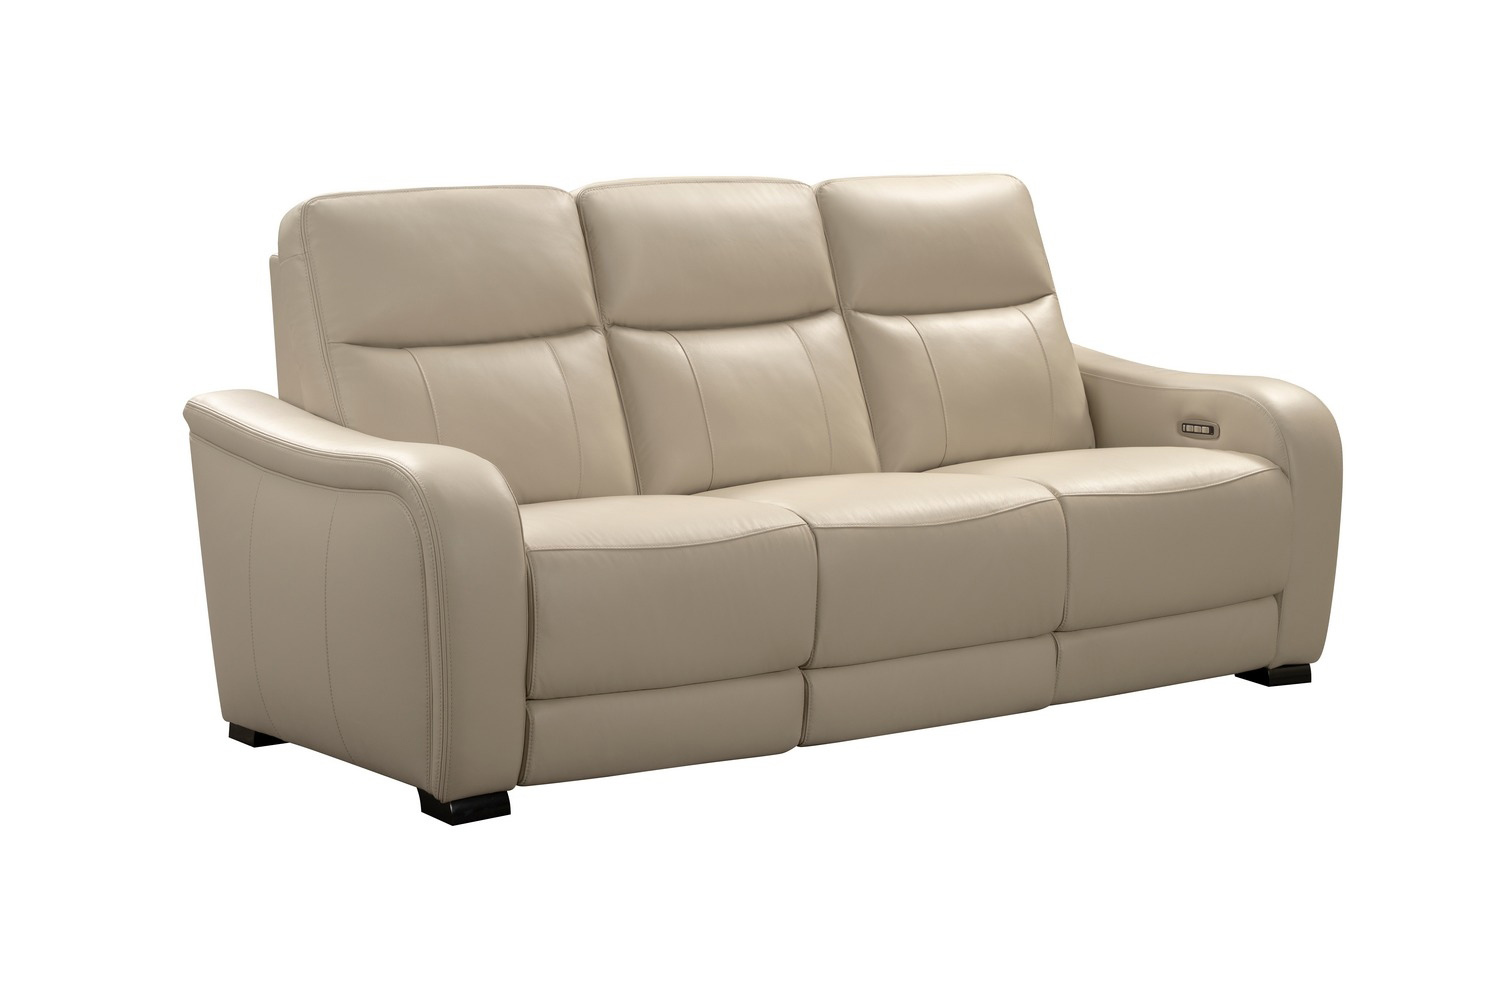 Barcalounger Electra Power Reclining Sofa with Power Head Rests and Power Lumbar - Laurel Cream/Leather Match